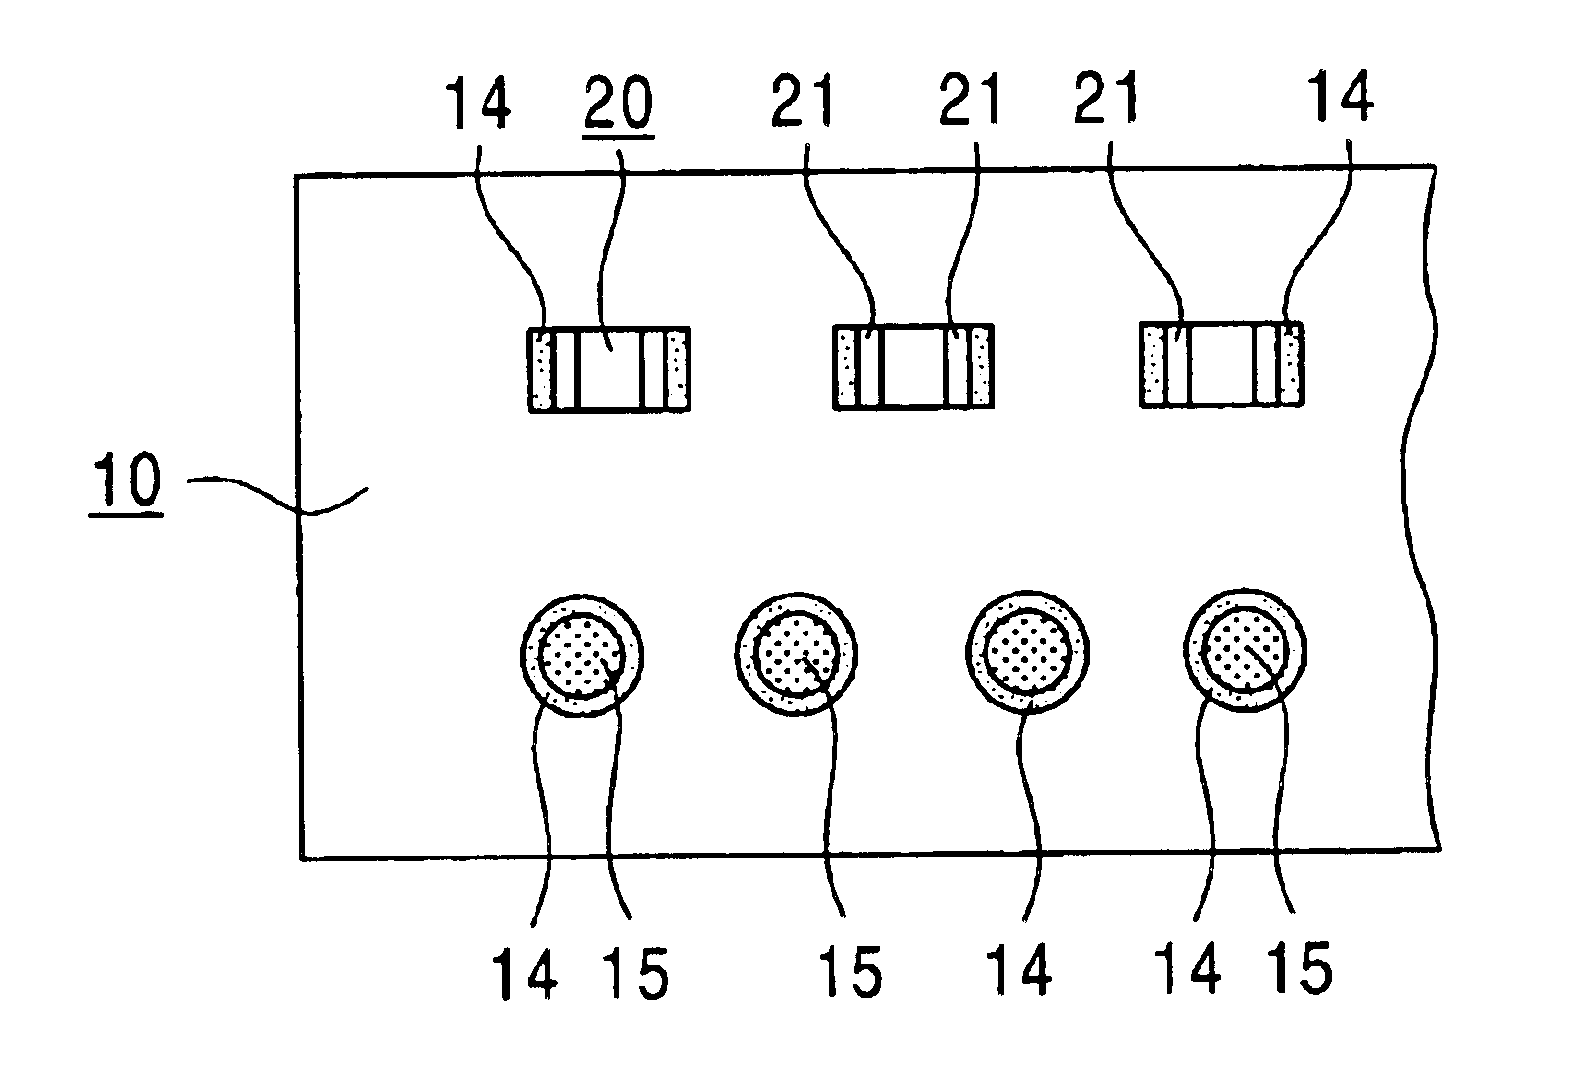 Solder joint structure and method for soldering electronic components